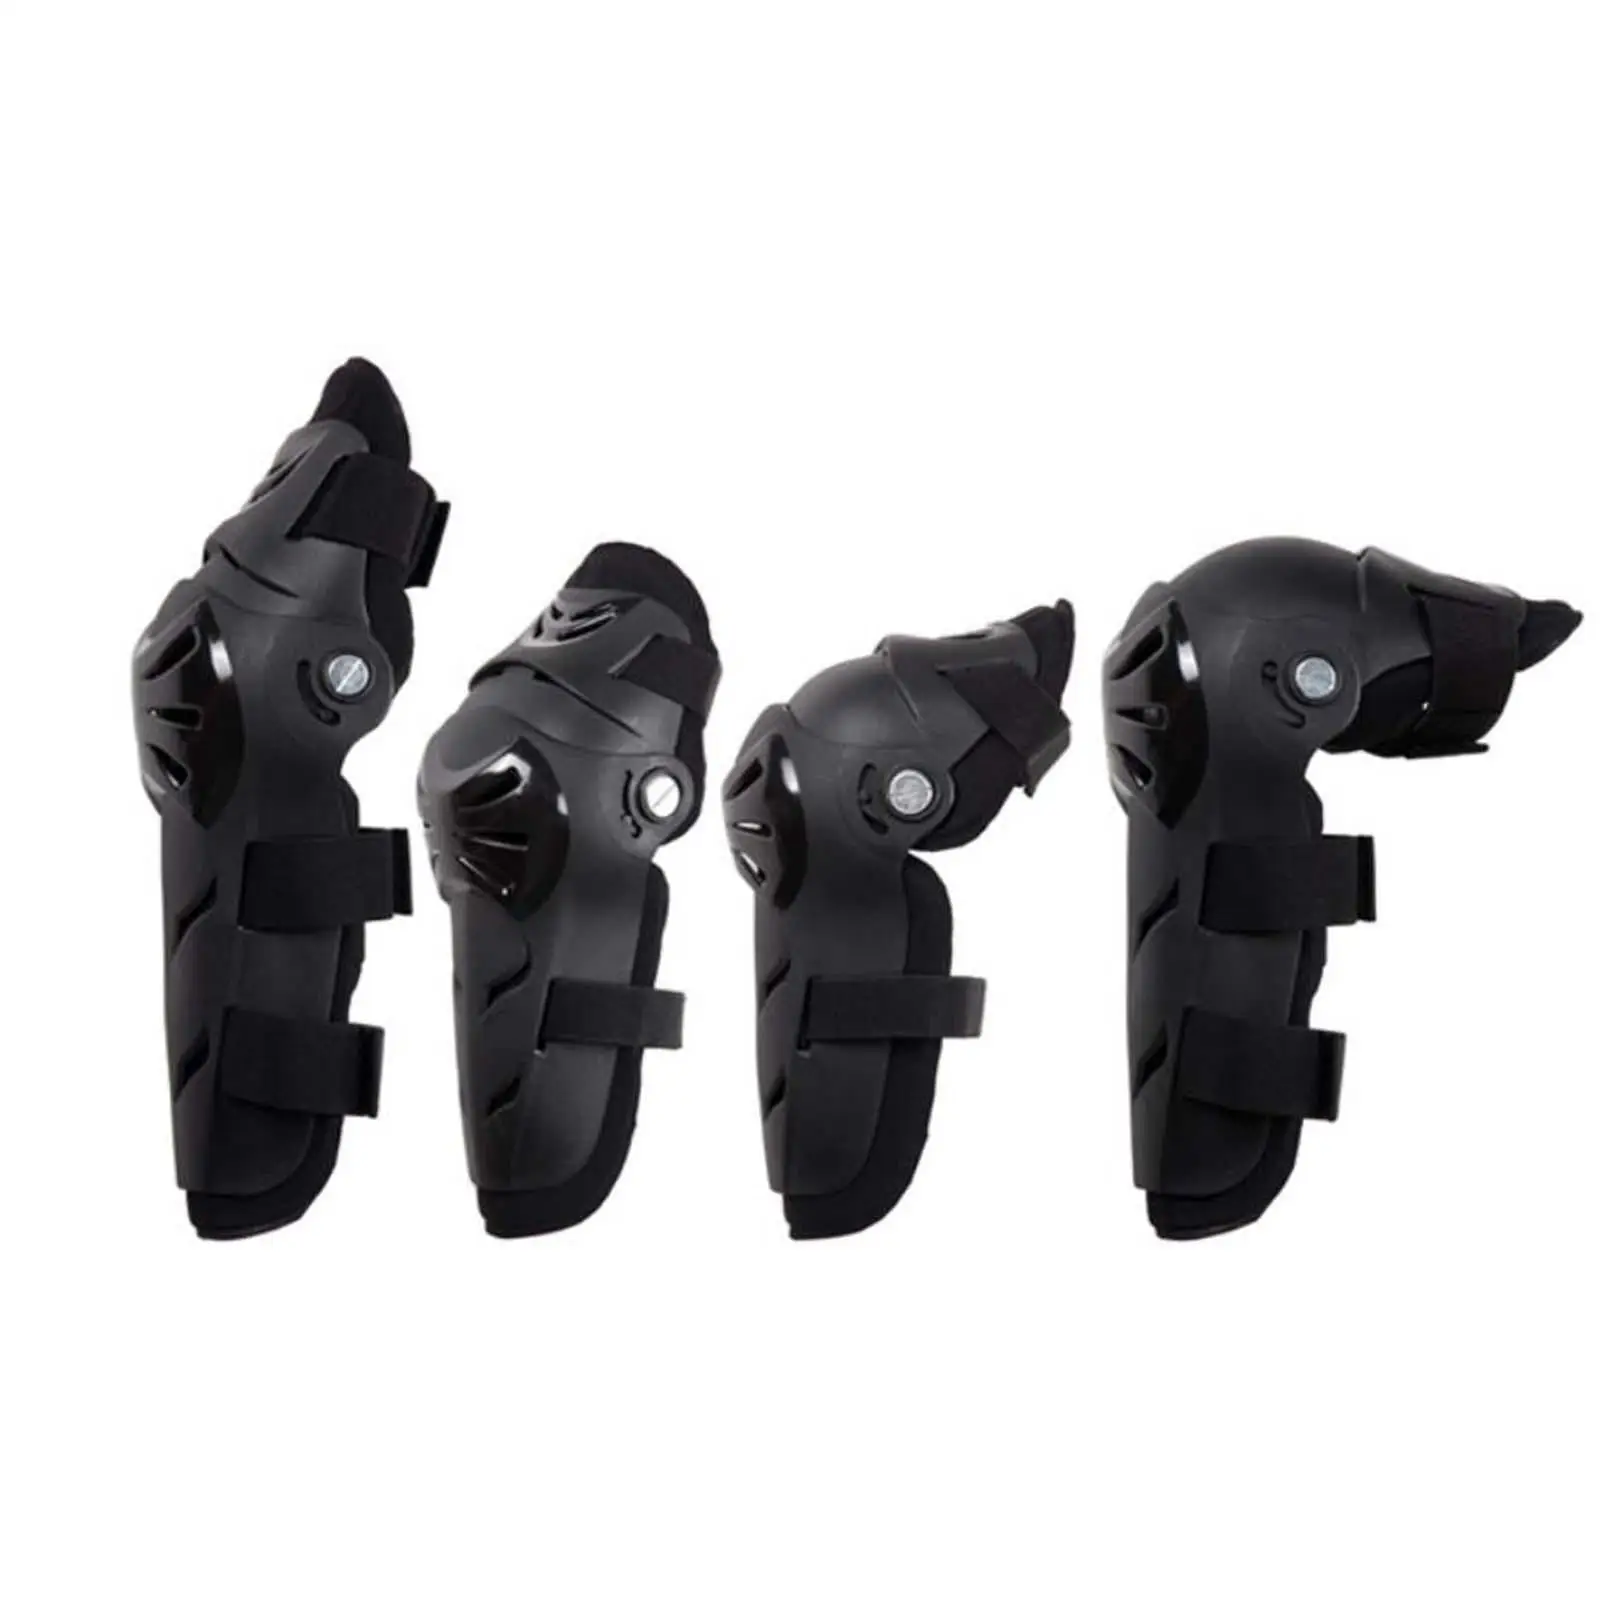 4Pcs Motocross Elbow Knee Shin Guards Shell Protector Flexible Cusion Elbow Knee Pads for Skating Sport Cycling Motocross